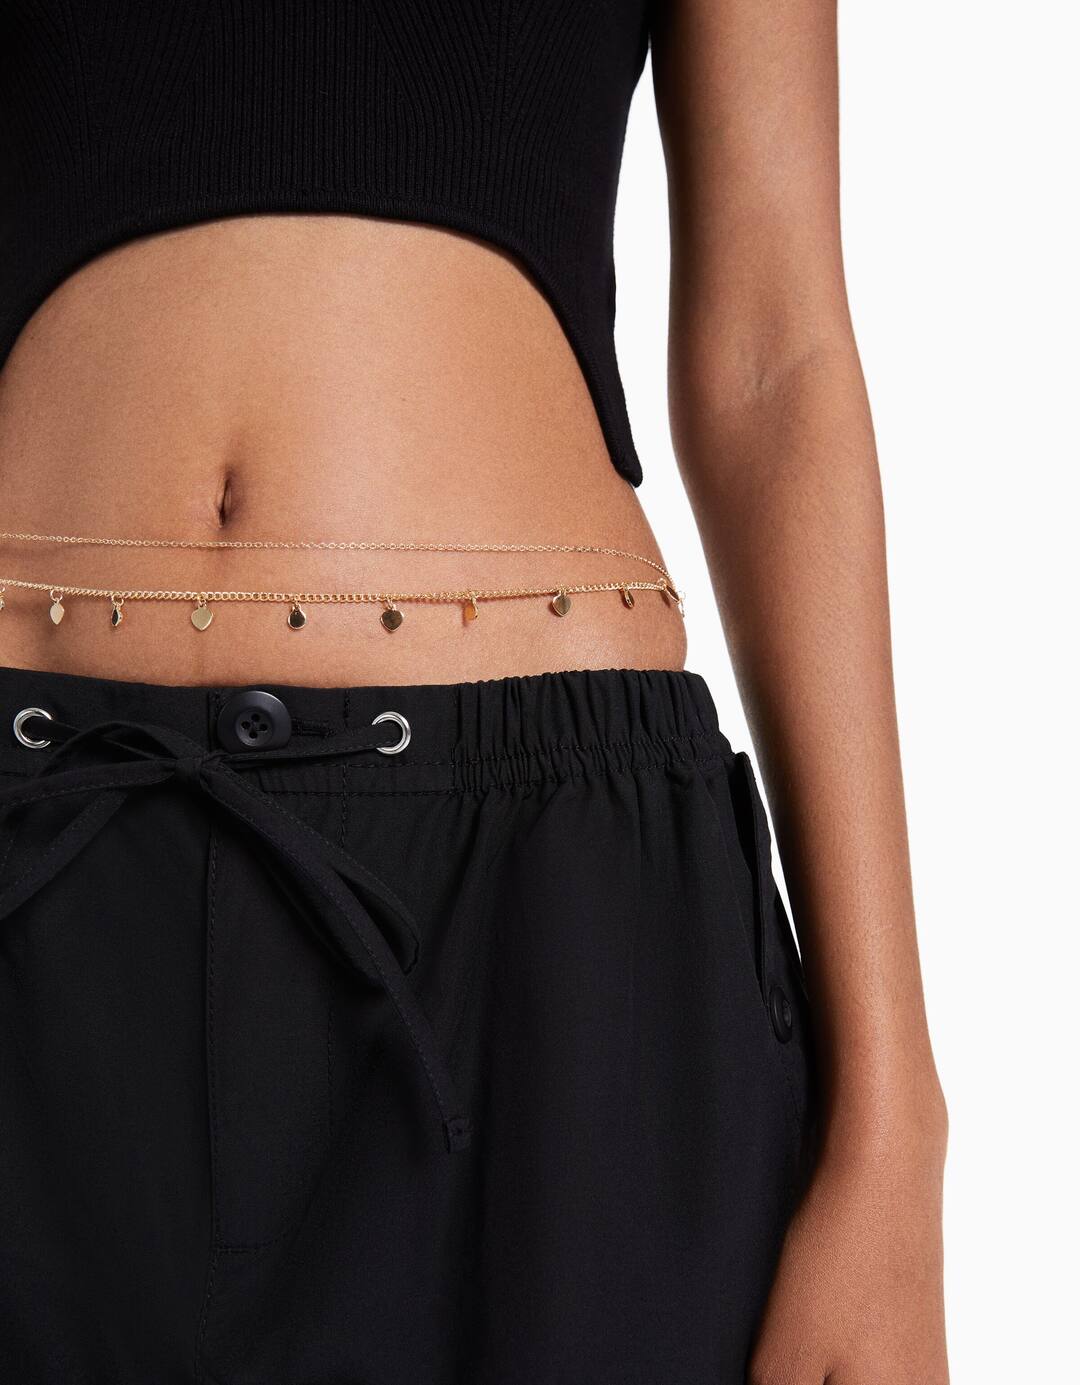 Belly chain with circles